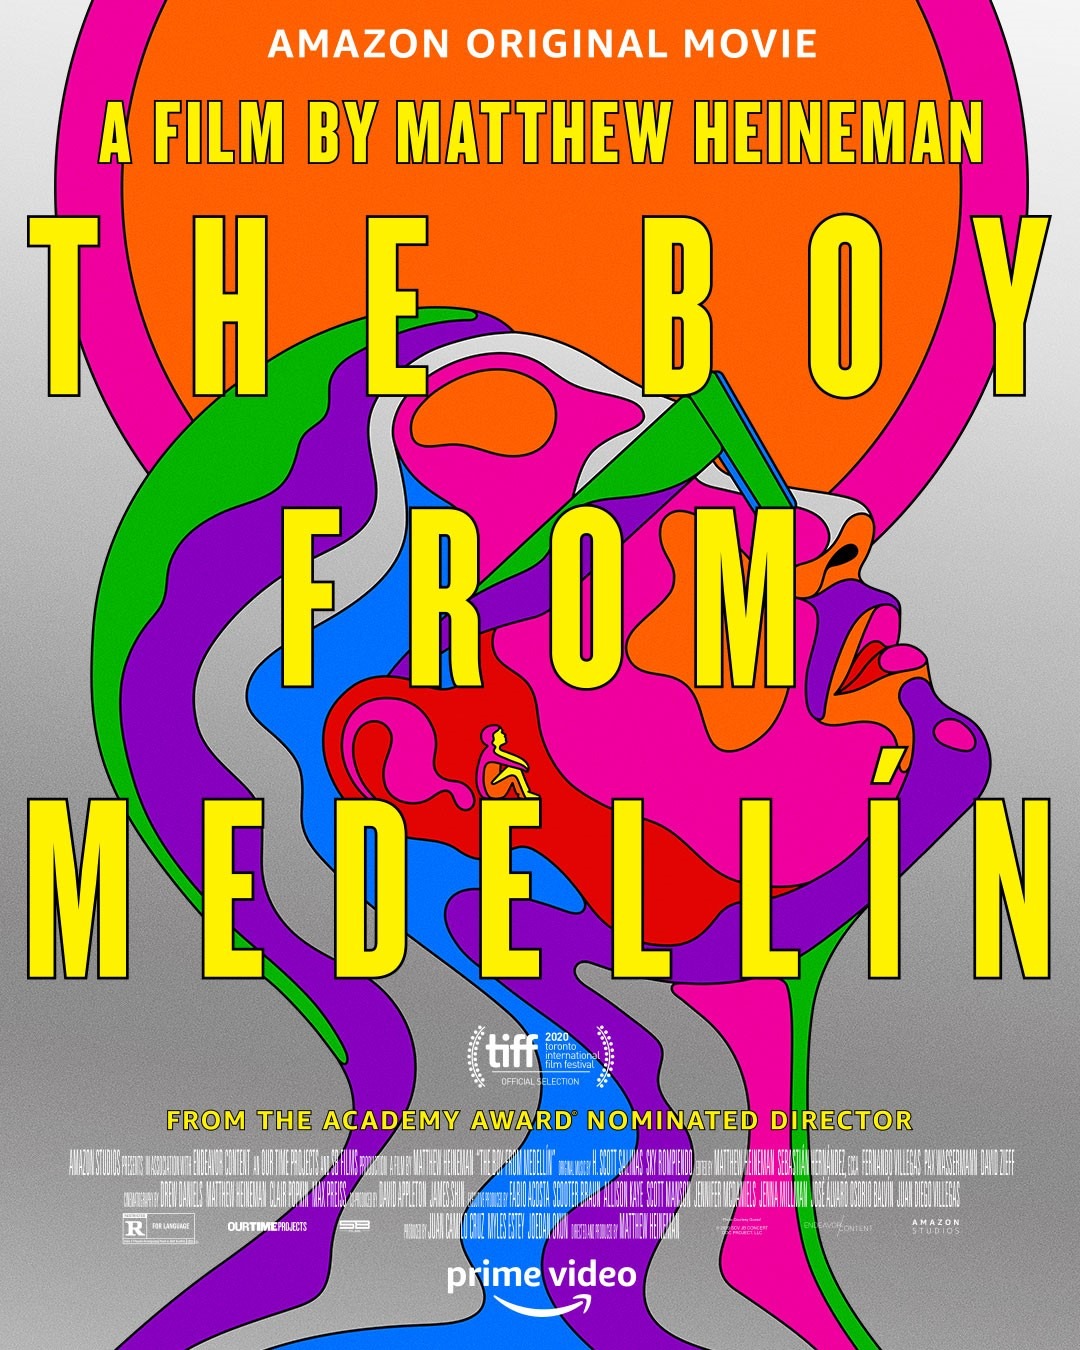 Extra Large Movie Poster Image for The Boy from Medellín (#2 of 2)